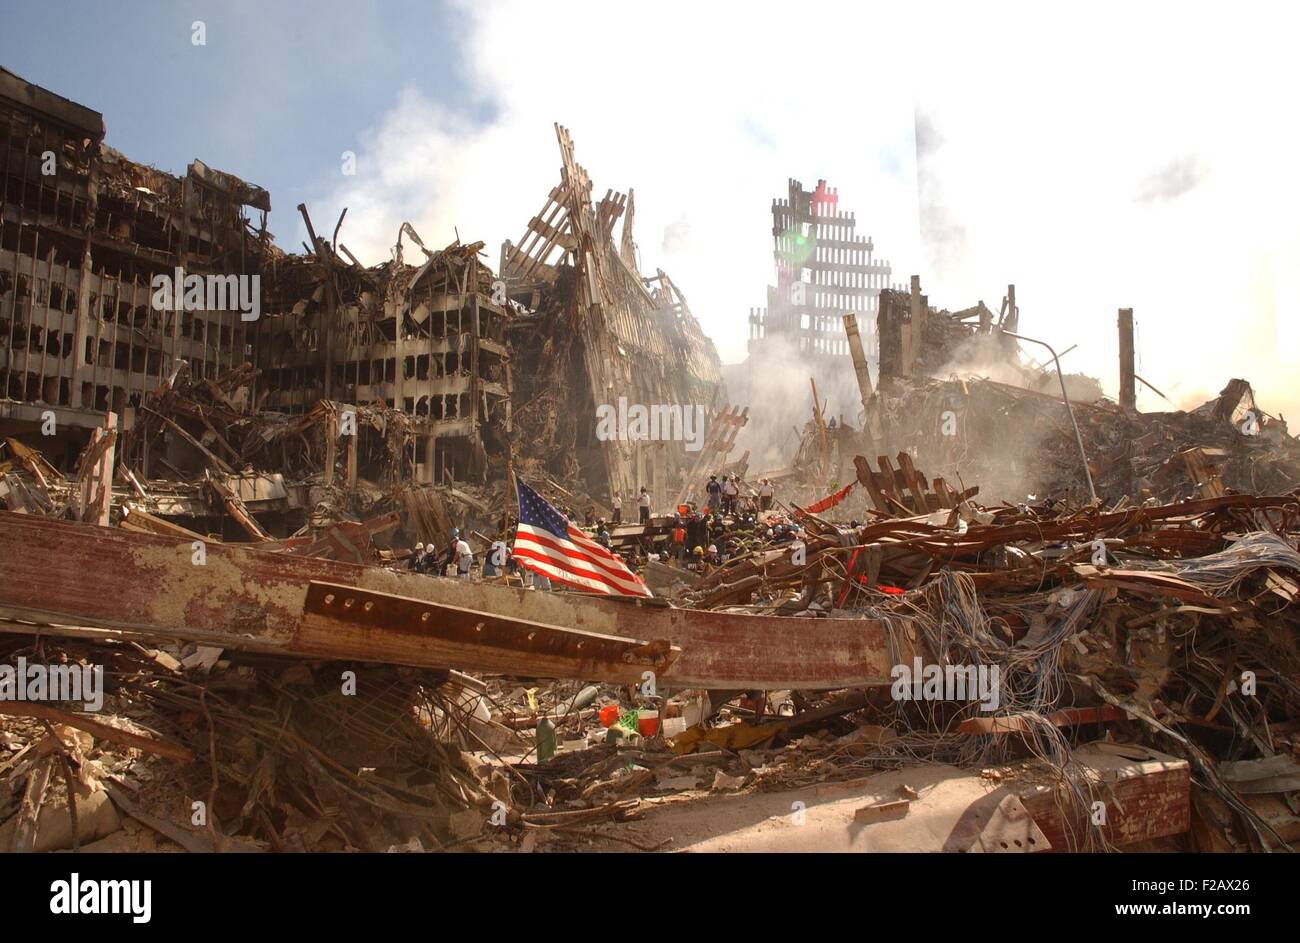 Smoke rises from the World Trade Center's collapsed North Tower. On the left are the remains of a lower structure, WTC 6. A large flag is secured to a beam in the foreground. New York City, Sept. 16, 2001. (BSLOC_2015_2_84) Stock Photo